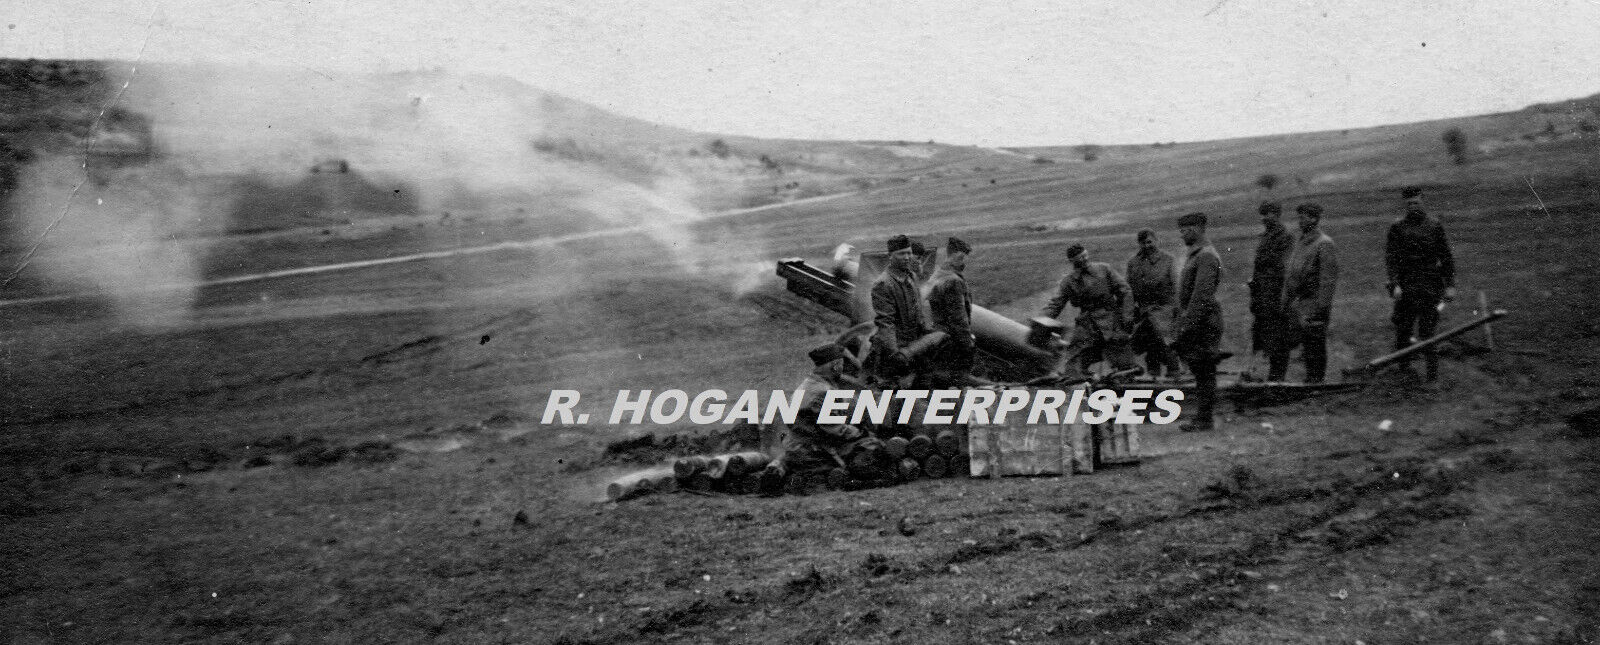 C. 1900s WWI FRANCE FRENCH MILITARY FIRING HOWITZER CANNON 8X10 PRINT PHOTO F503